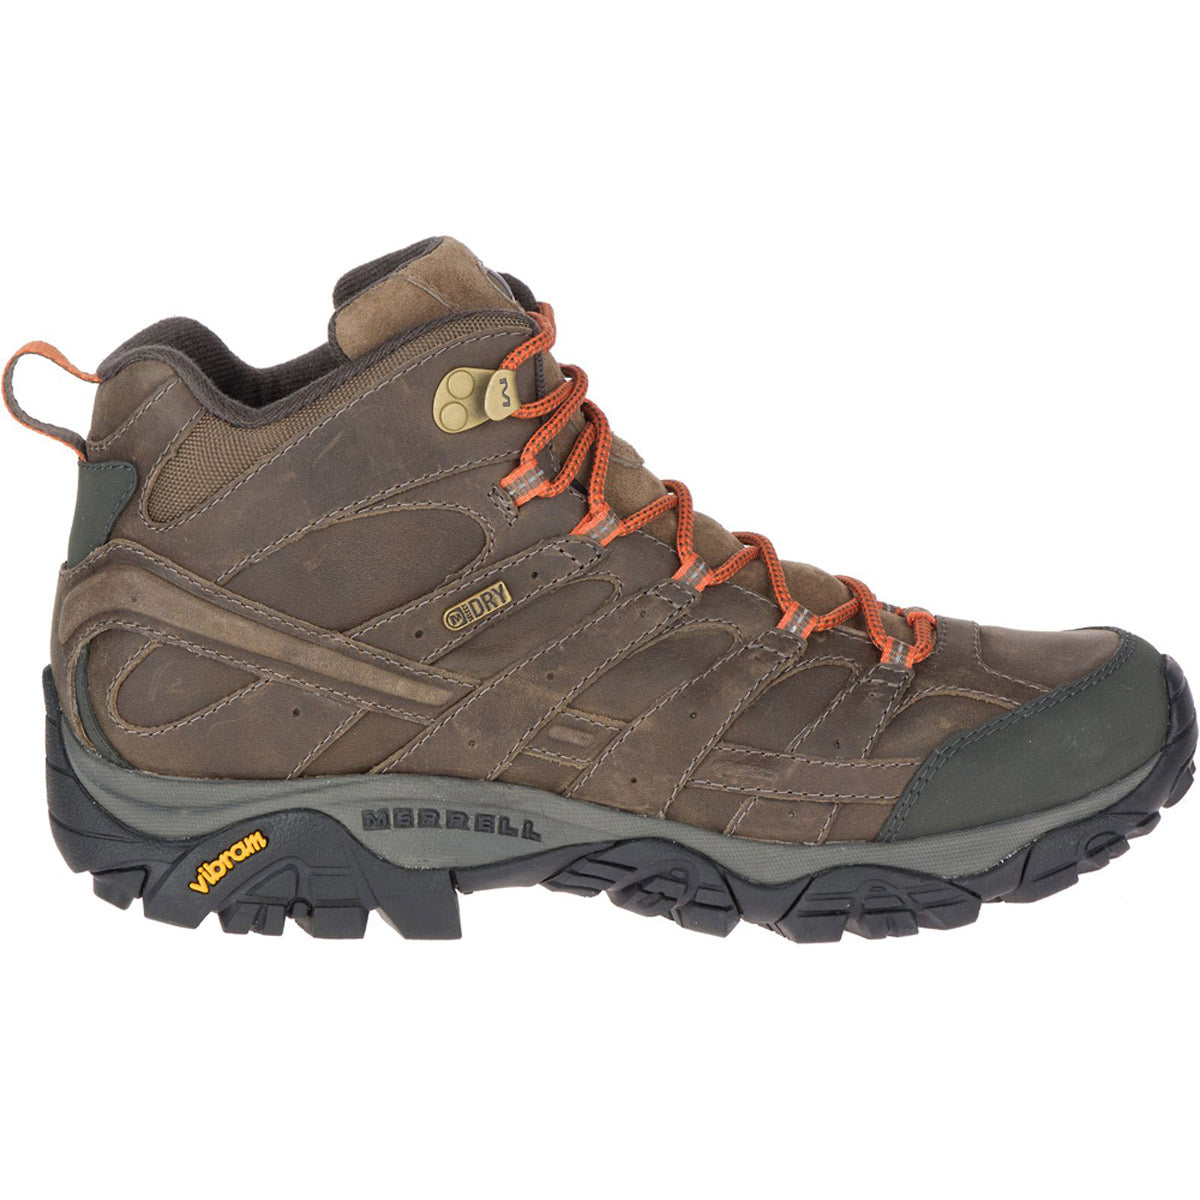 Merrell hiking boot with Vibram TC5+ sole.